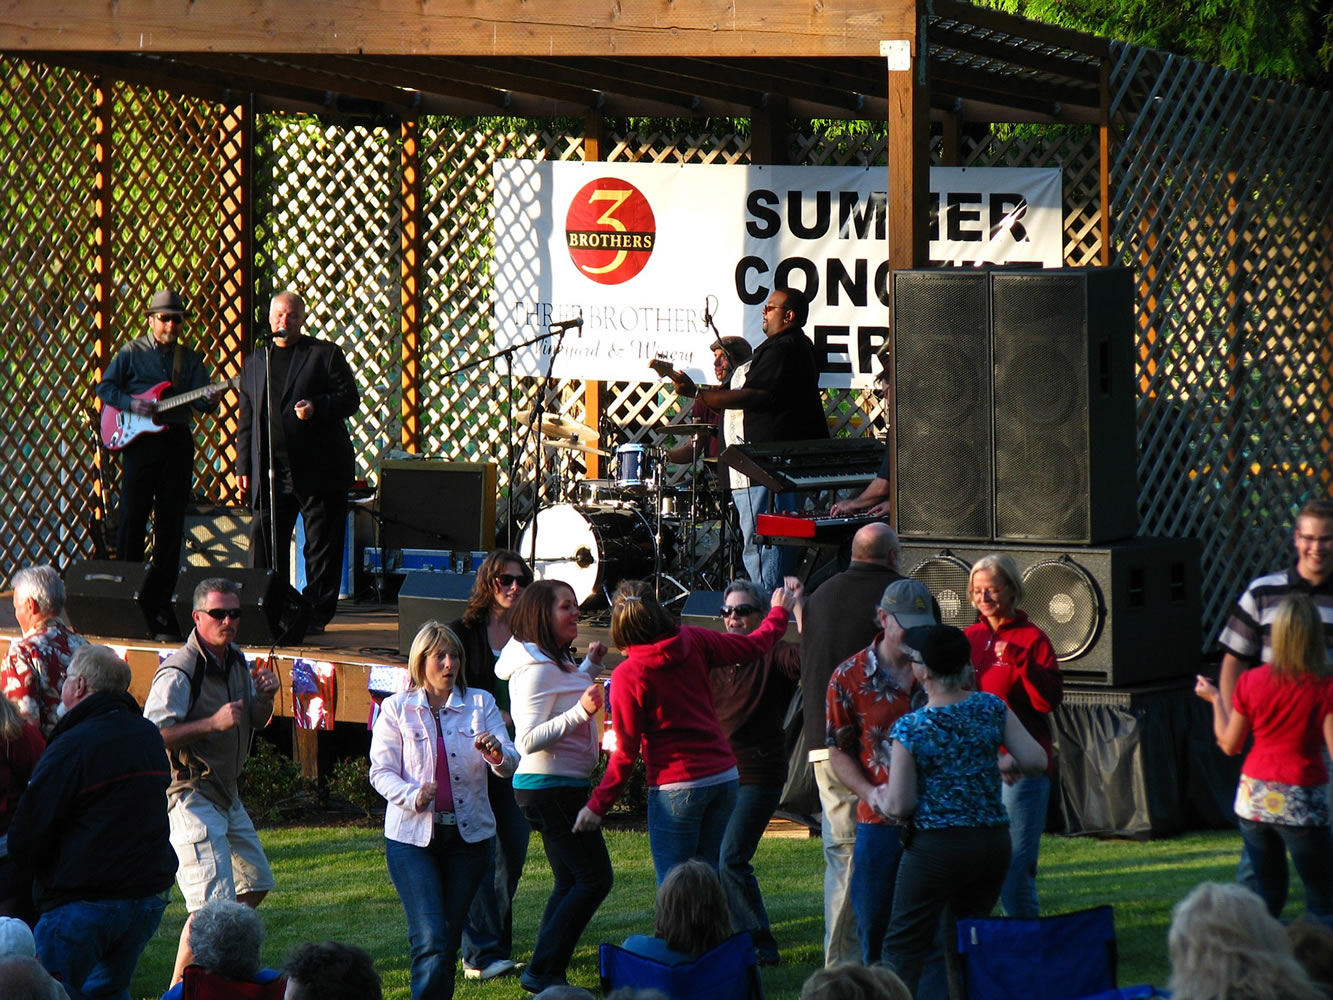 Three Brothers
Portland-area favorite Curtis Salgado has appeared at the Three Brothers Summer Concert Series. This year Journey tribute band Stone in Love and Lloyd Jones will entertain attendees at this Ridgefield winery.